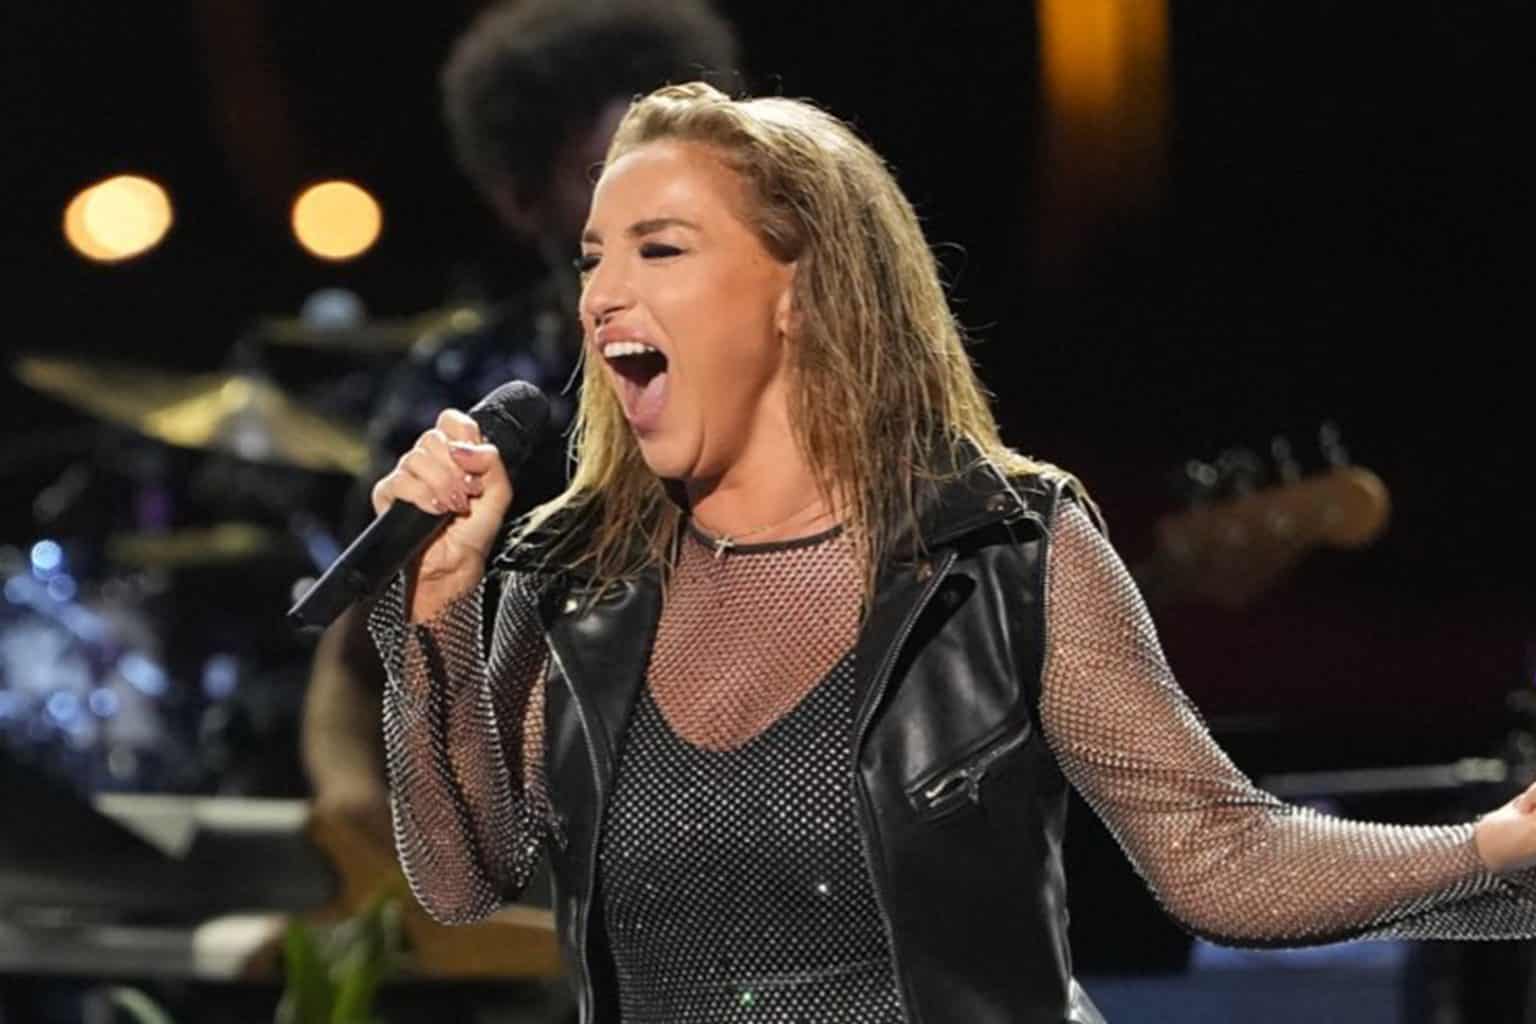 What Happened To Nutsa On American Idol? Explained